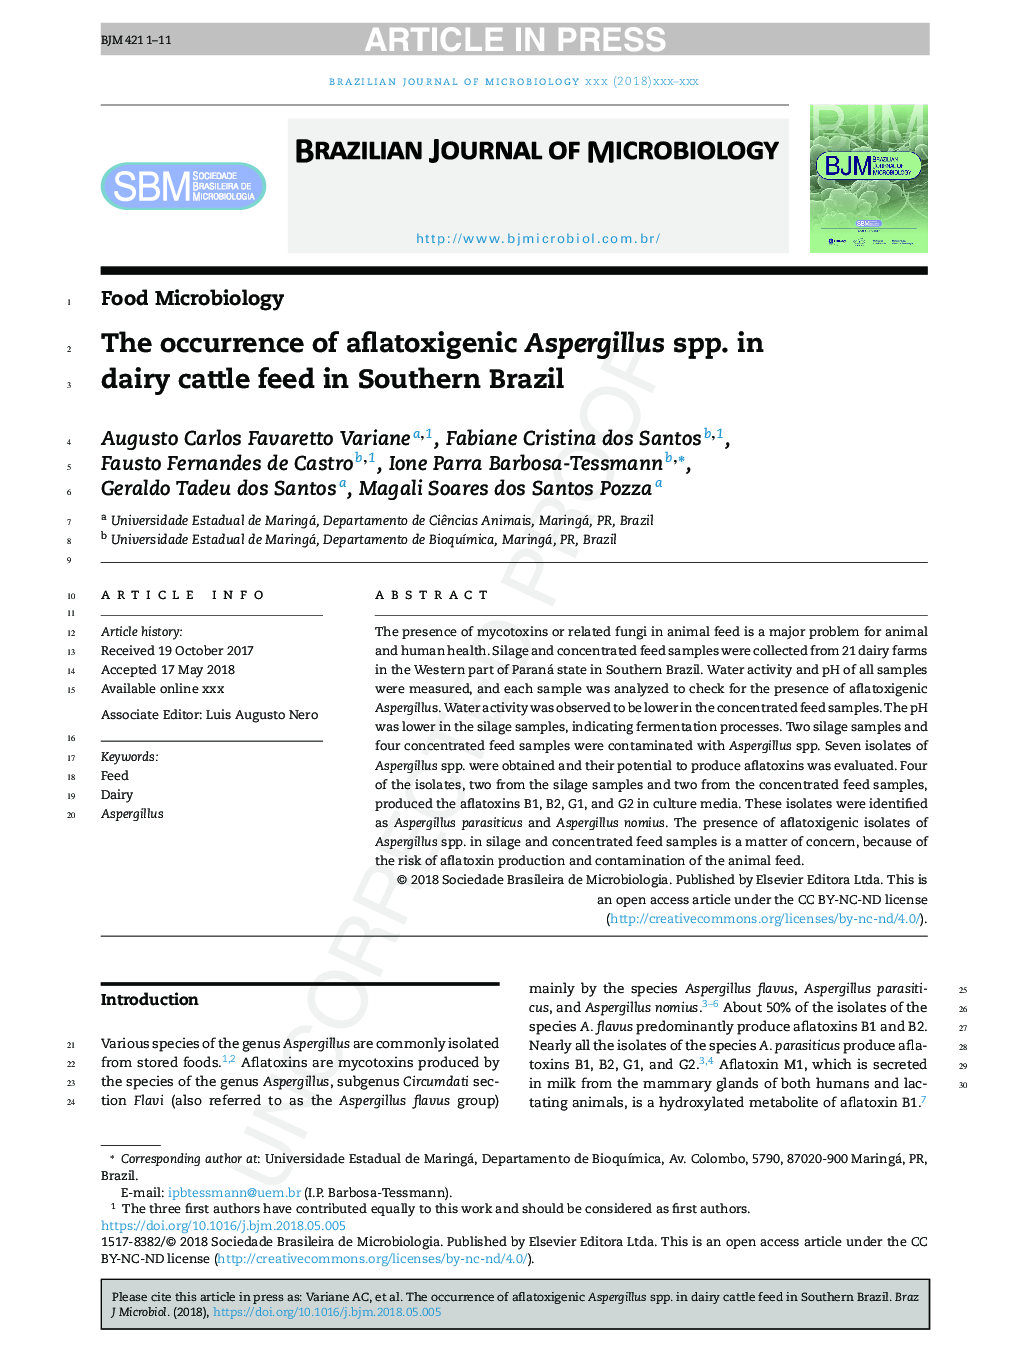 The occurrence of aflatoxigenic Aspergillus spp. in dairy cattle feed in Southern Brazil